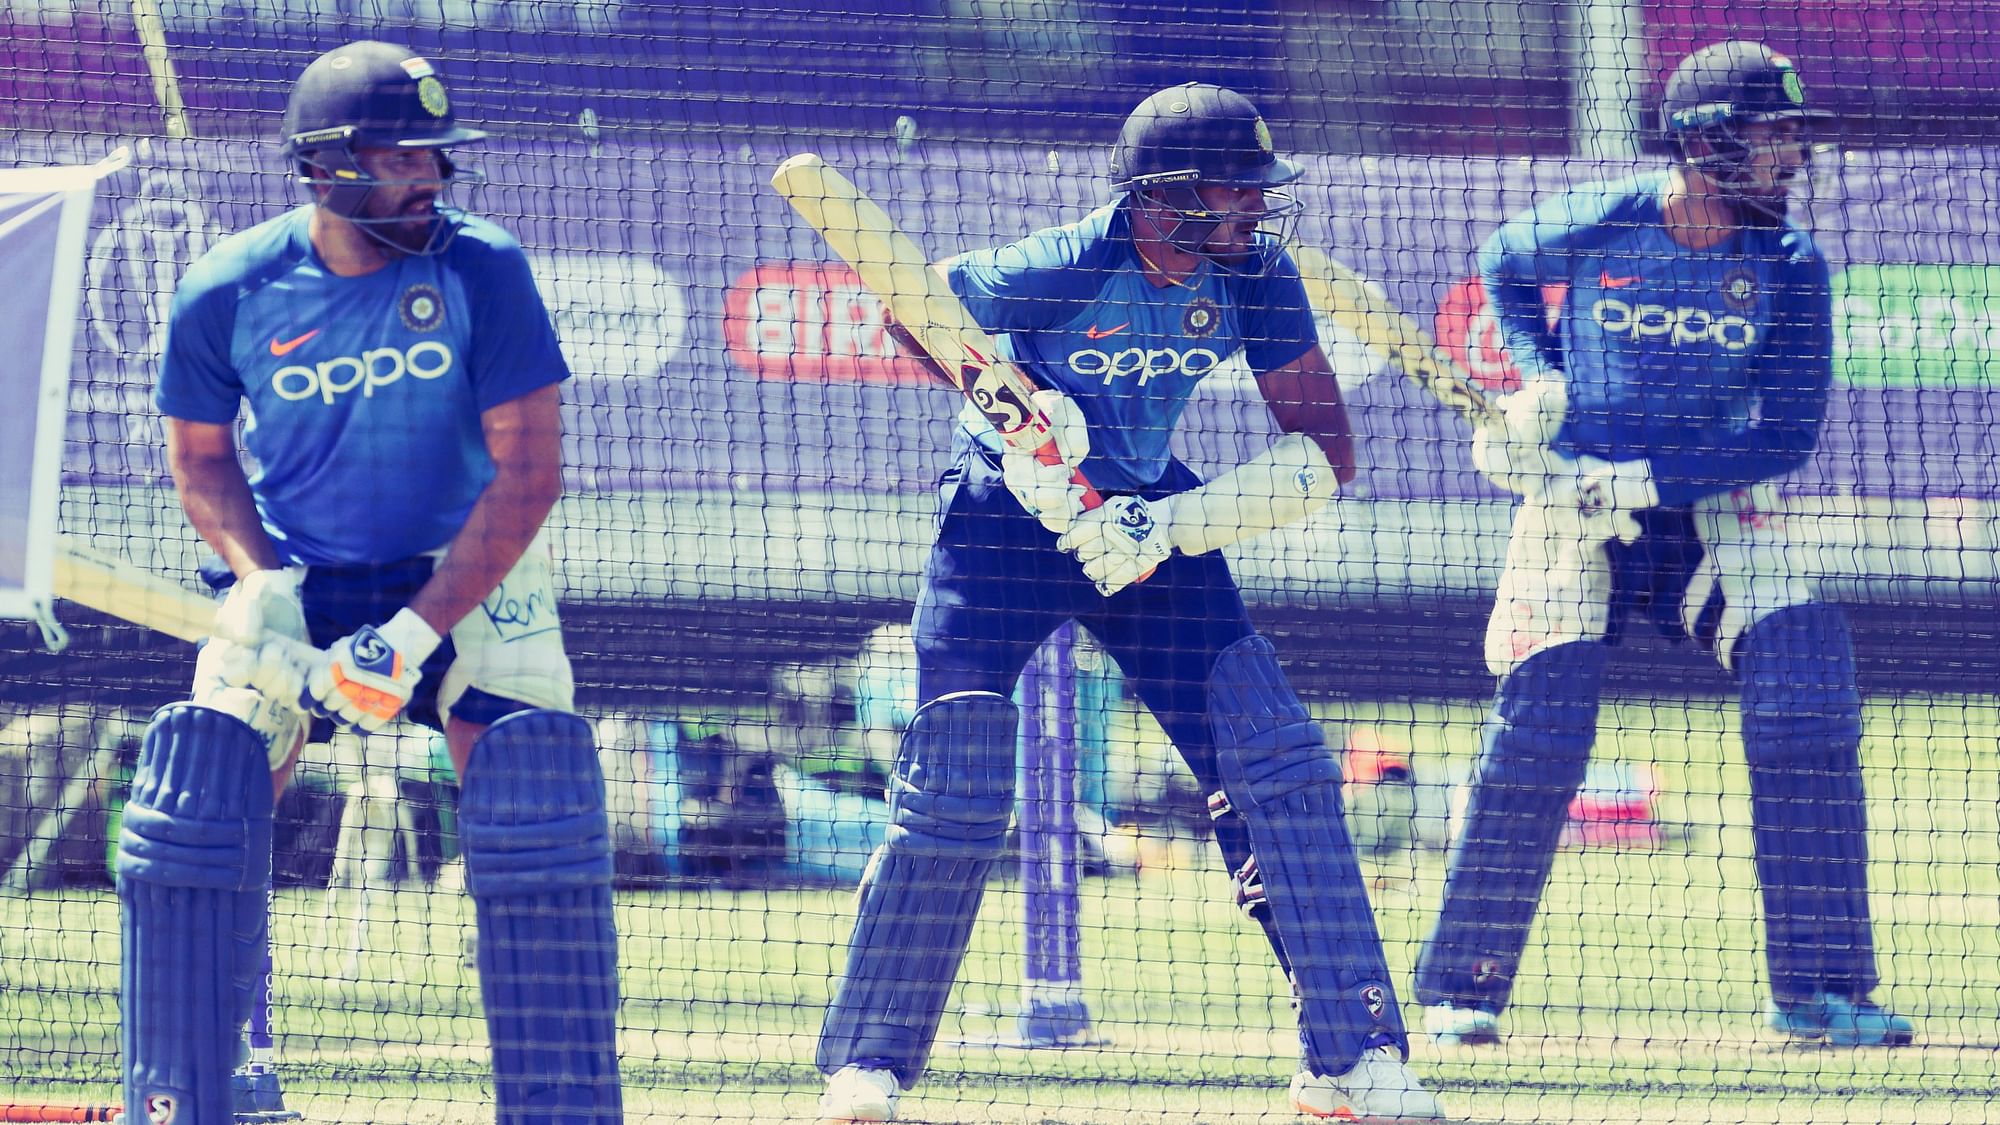 India’s Rohit Sharma, left, Vijay Shankar, center, and Lokesh Rahul bat in the nets during a training session at The Oval in London, Thursday, May 23, 2019. The Cricket World Cup starts on Thursday 30 May 30.